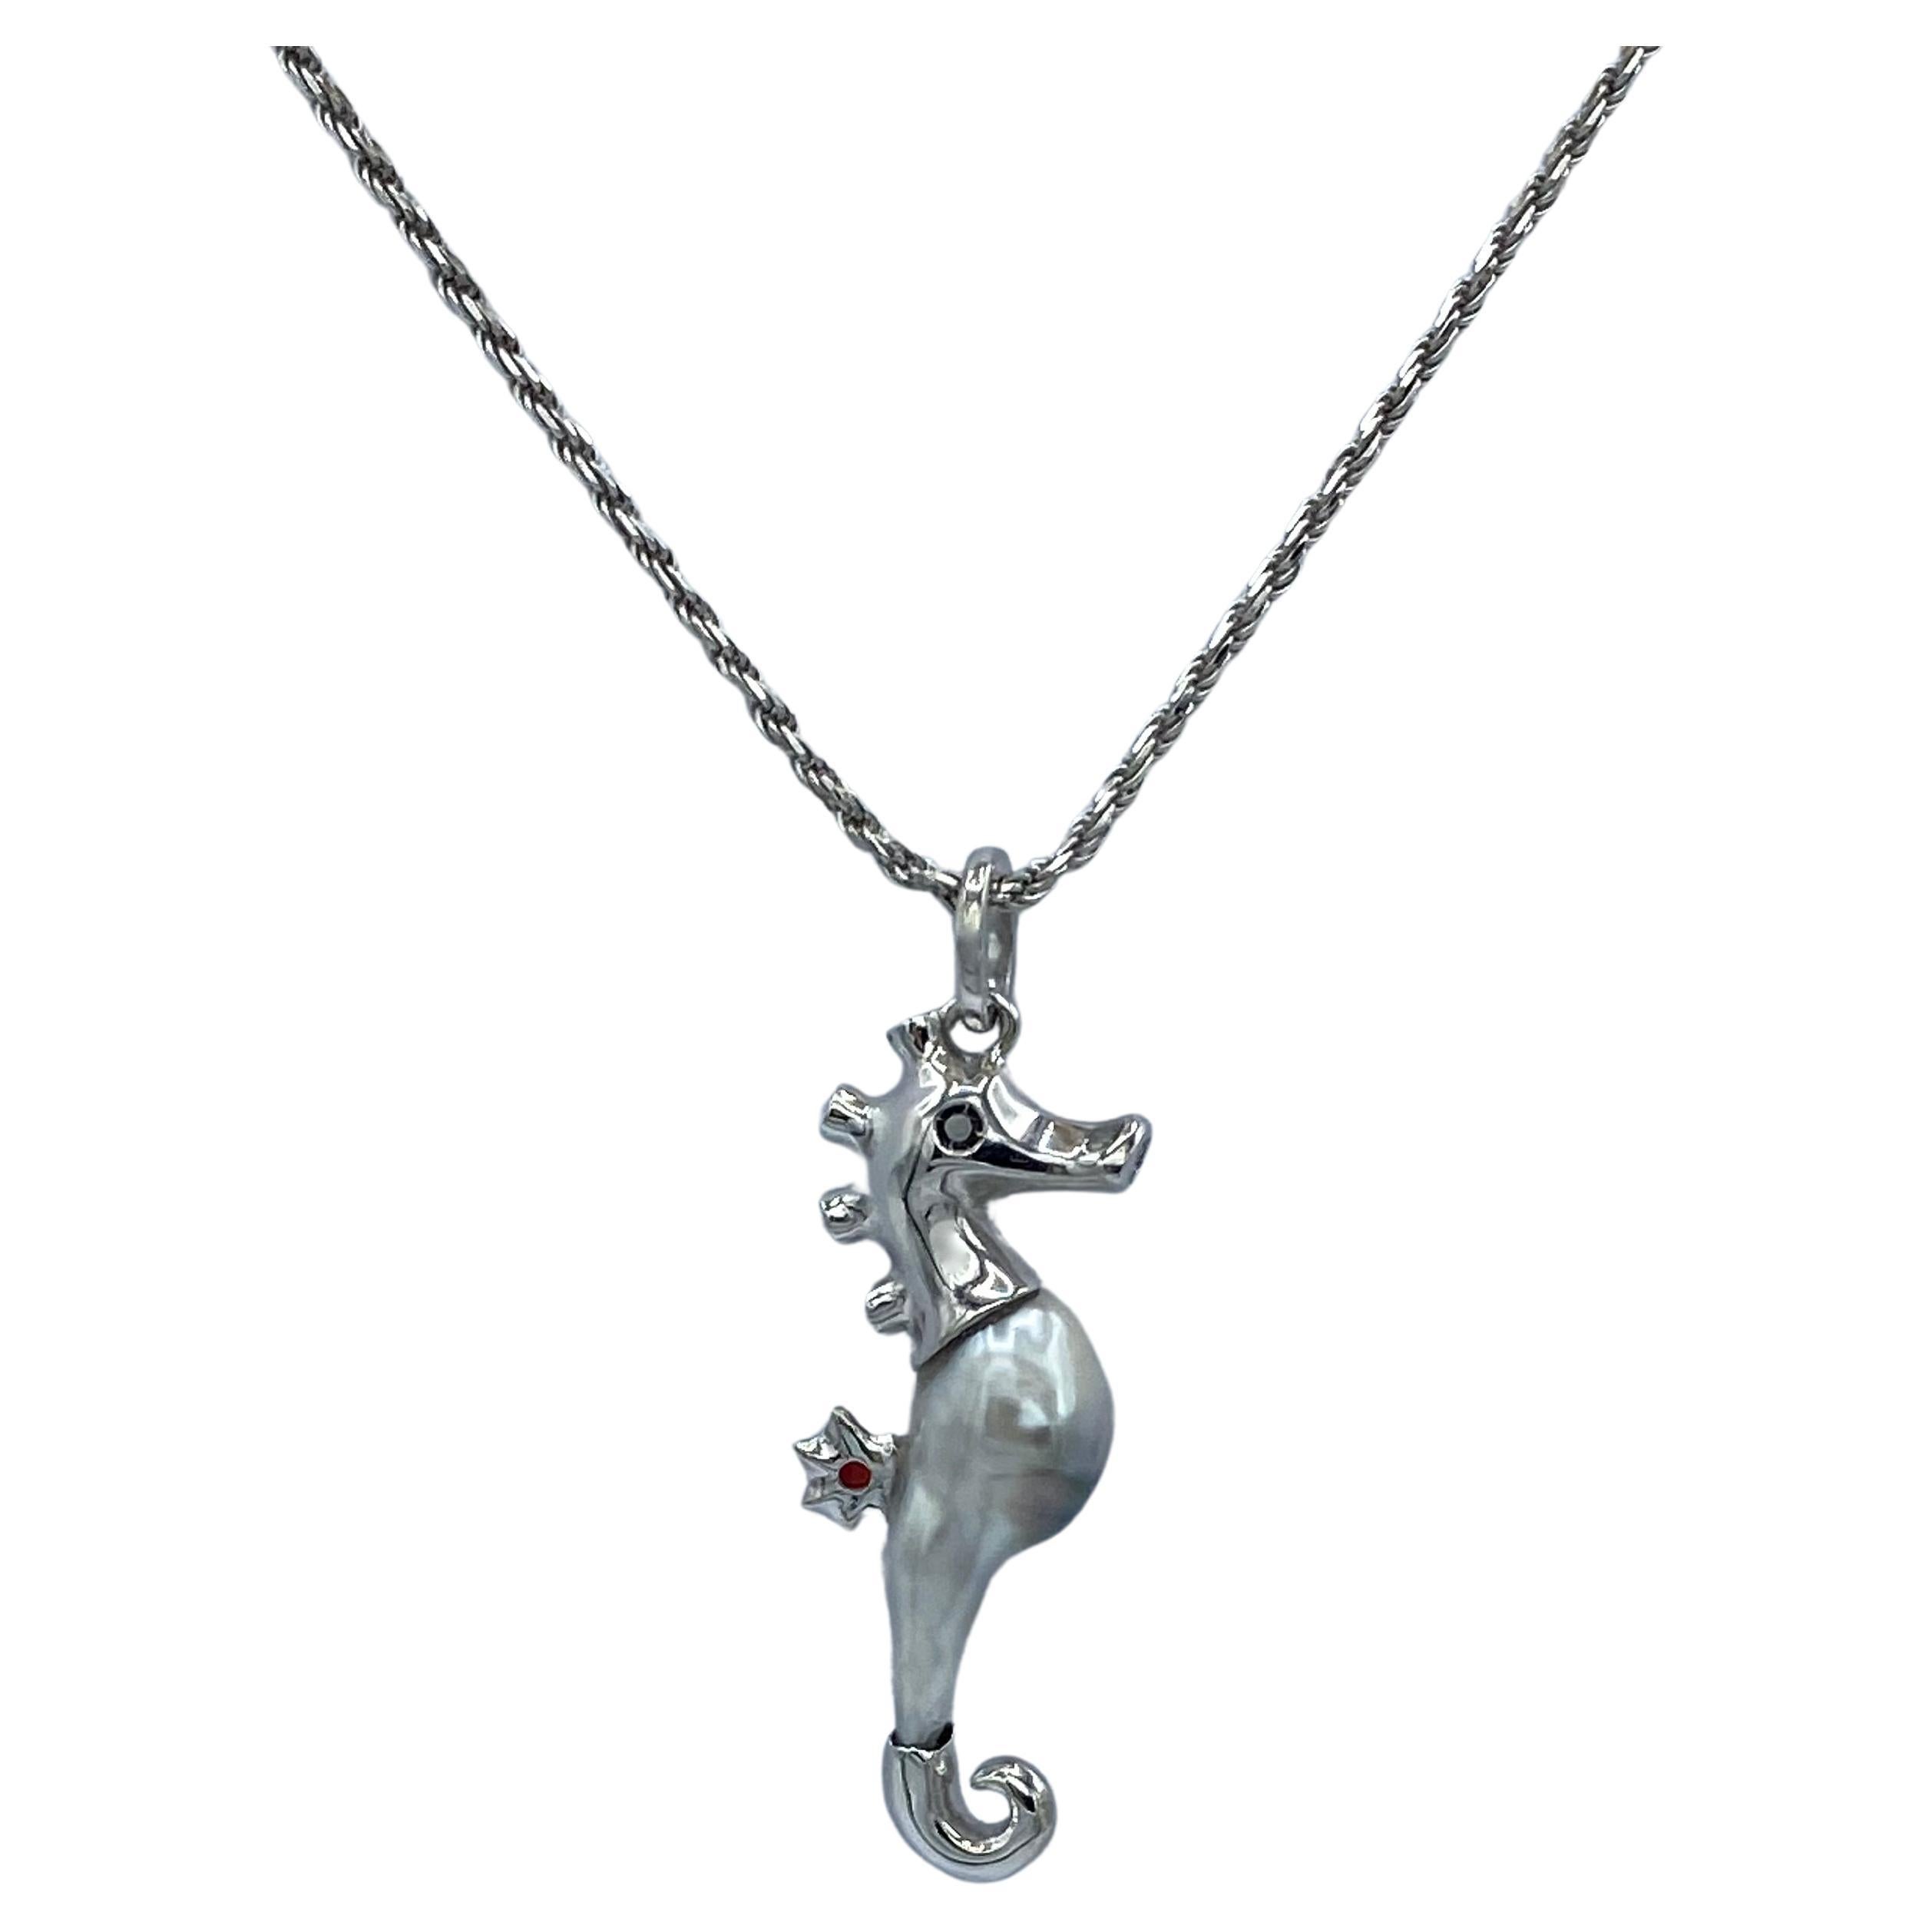 The elongated and distinctive shape of that keshi pearl inspired me to make a seahorse.
I created with wax and then cast in 18Kt white gold, the head, tail and dorsal fin.
The eyes are two black diamonds, in the mouth opening is a white diamond, and